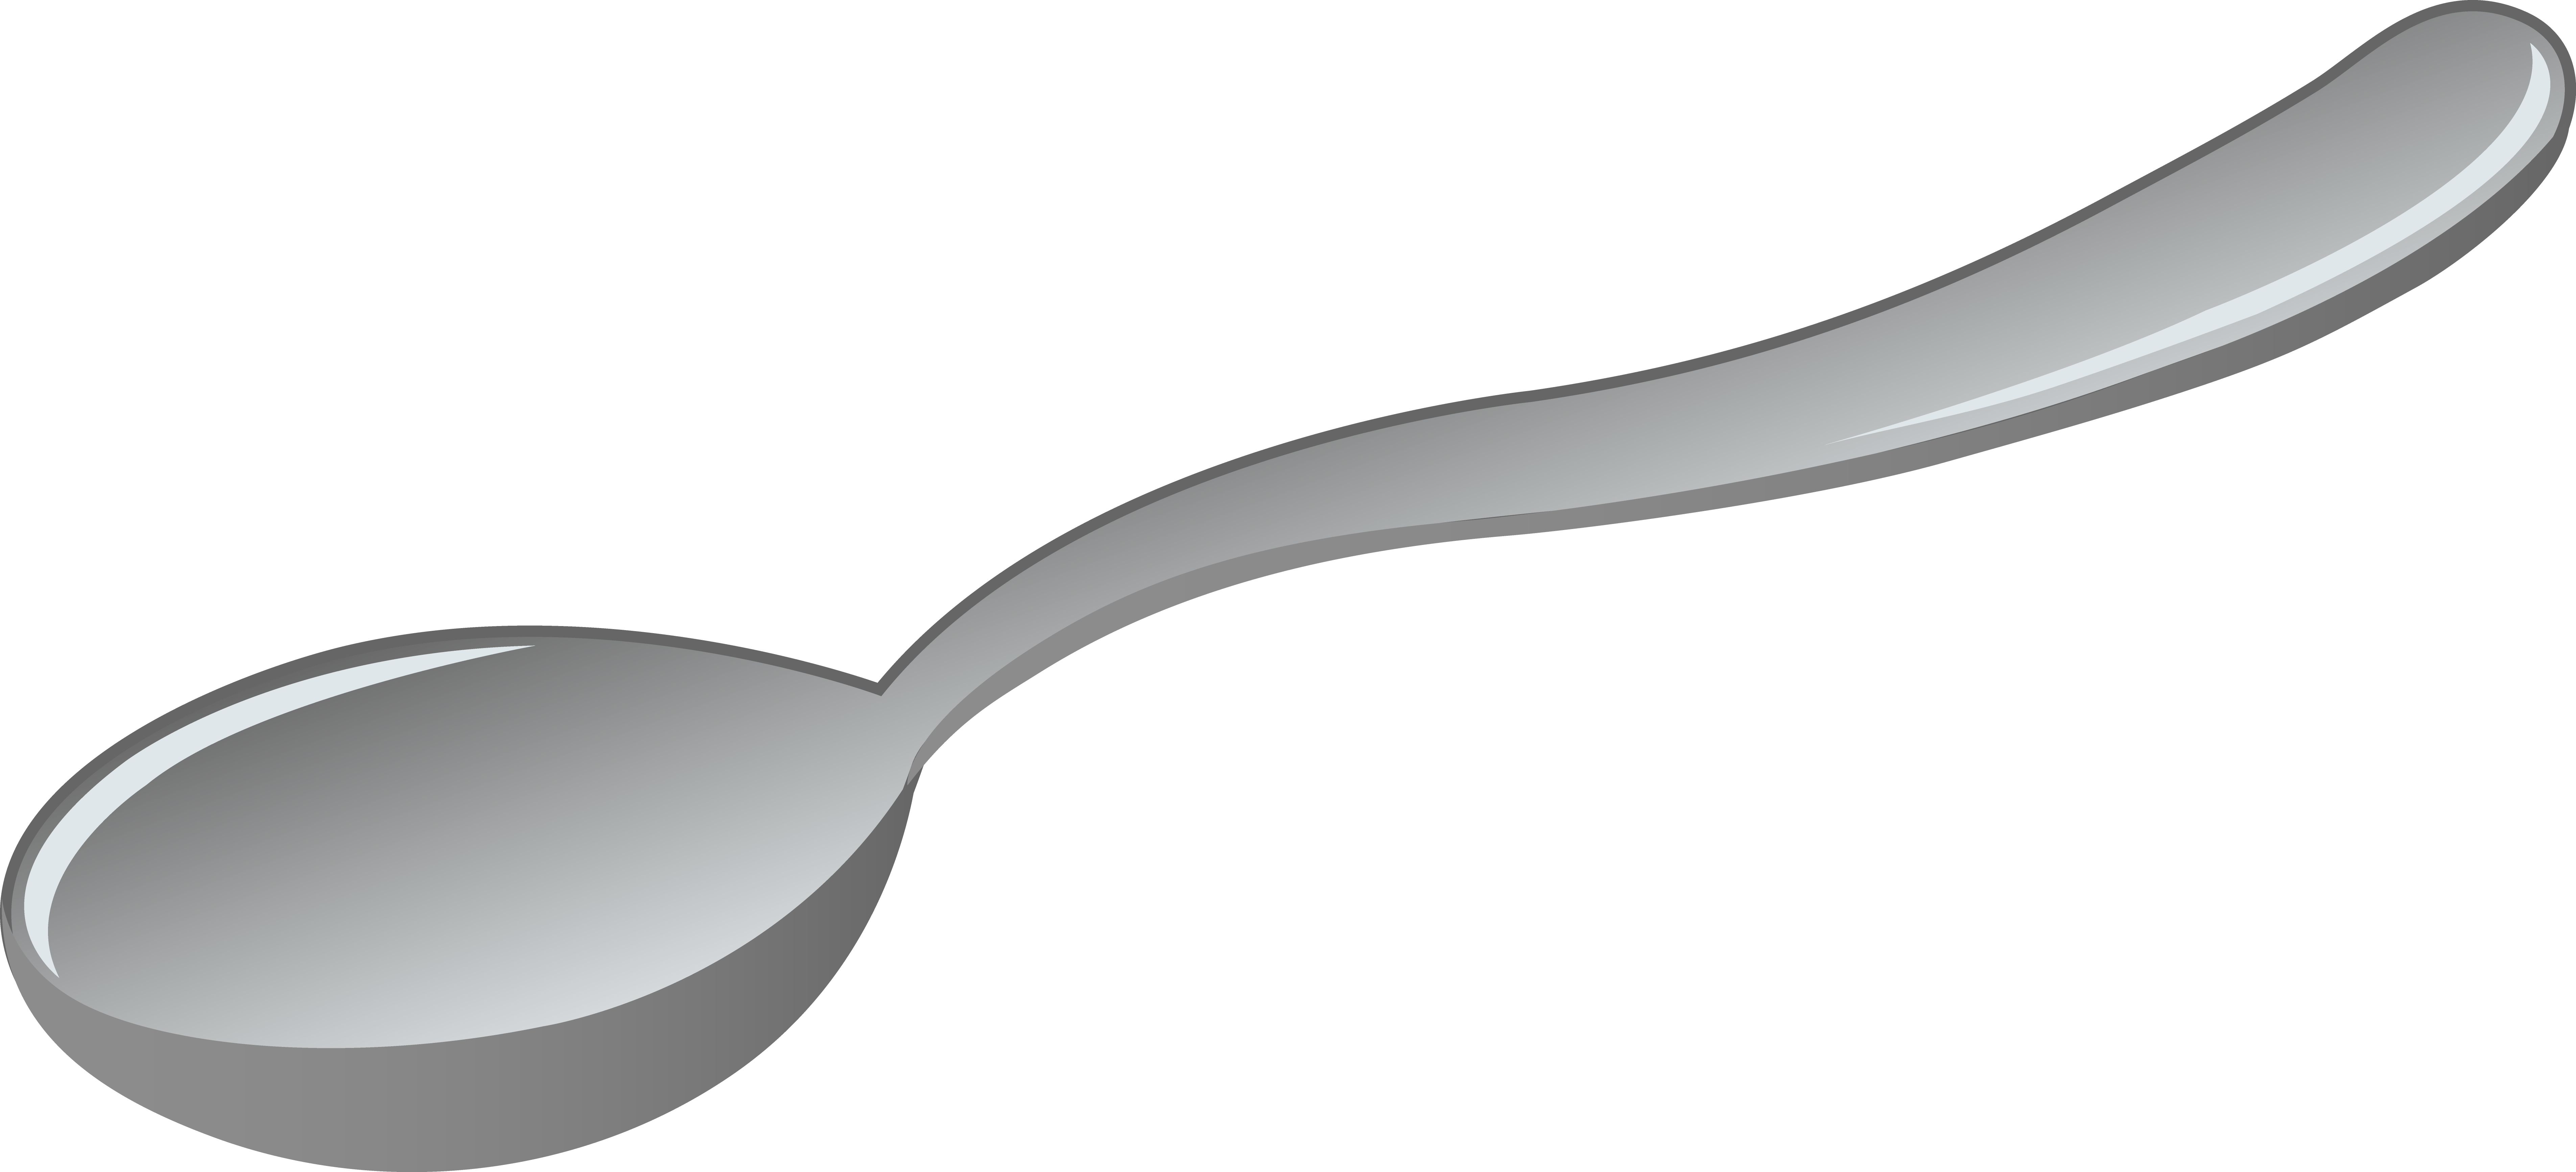 Fork clipart cartoon.  collection of spoon